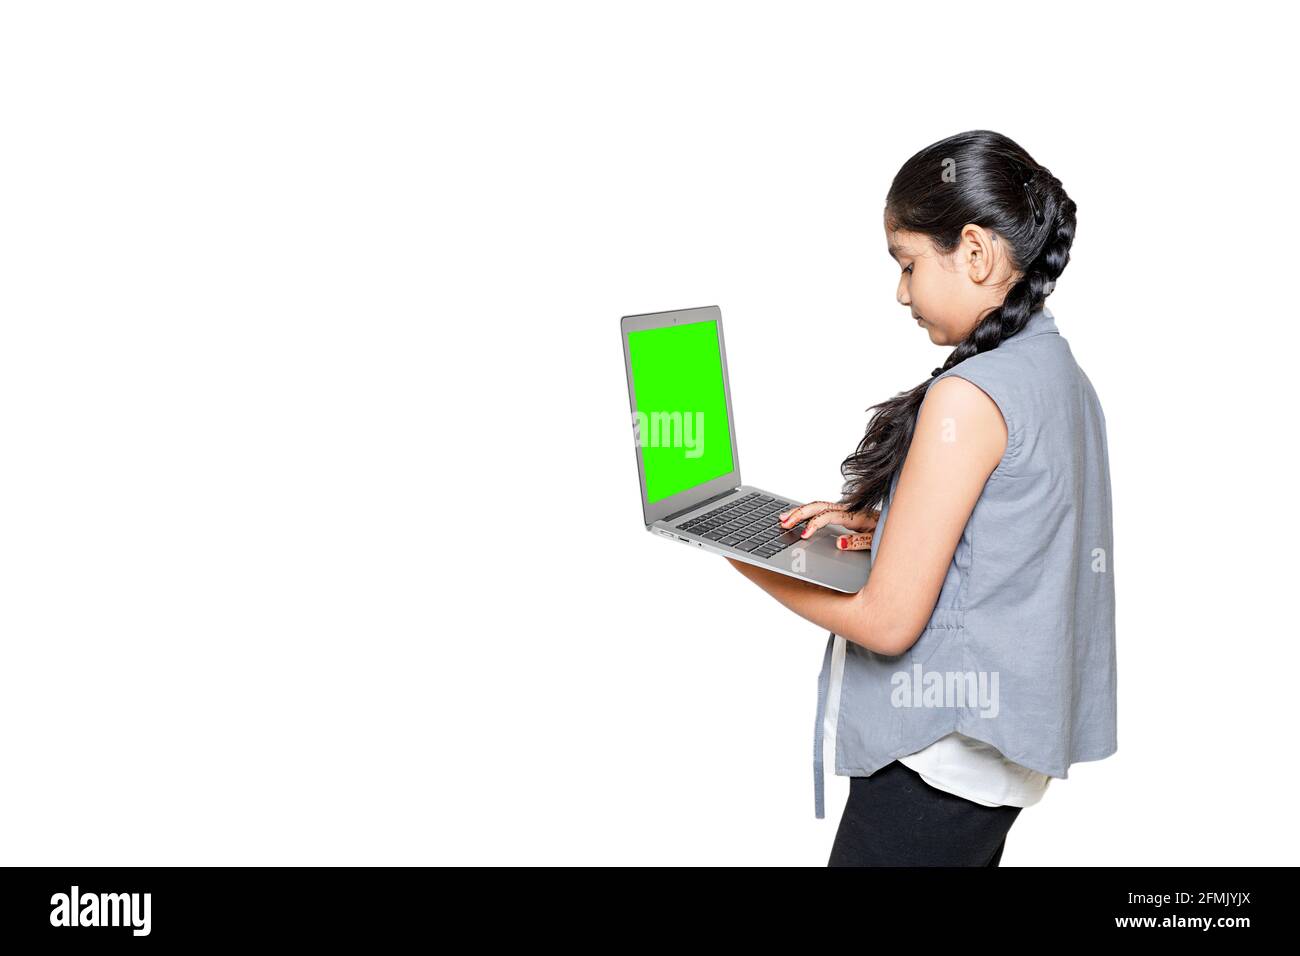 A young Indian girl is attending online school or classes. Study in lock down as Schools closed due to Covid-19. Role of technology during nationwide Stock Photo